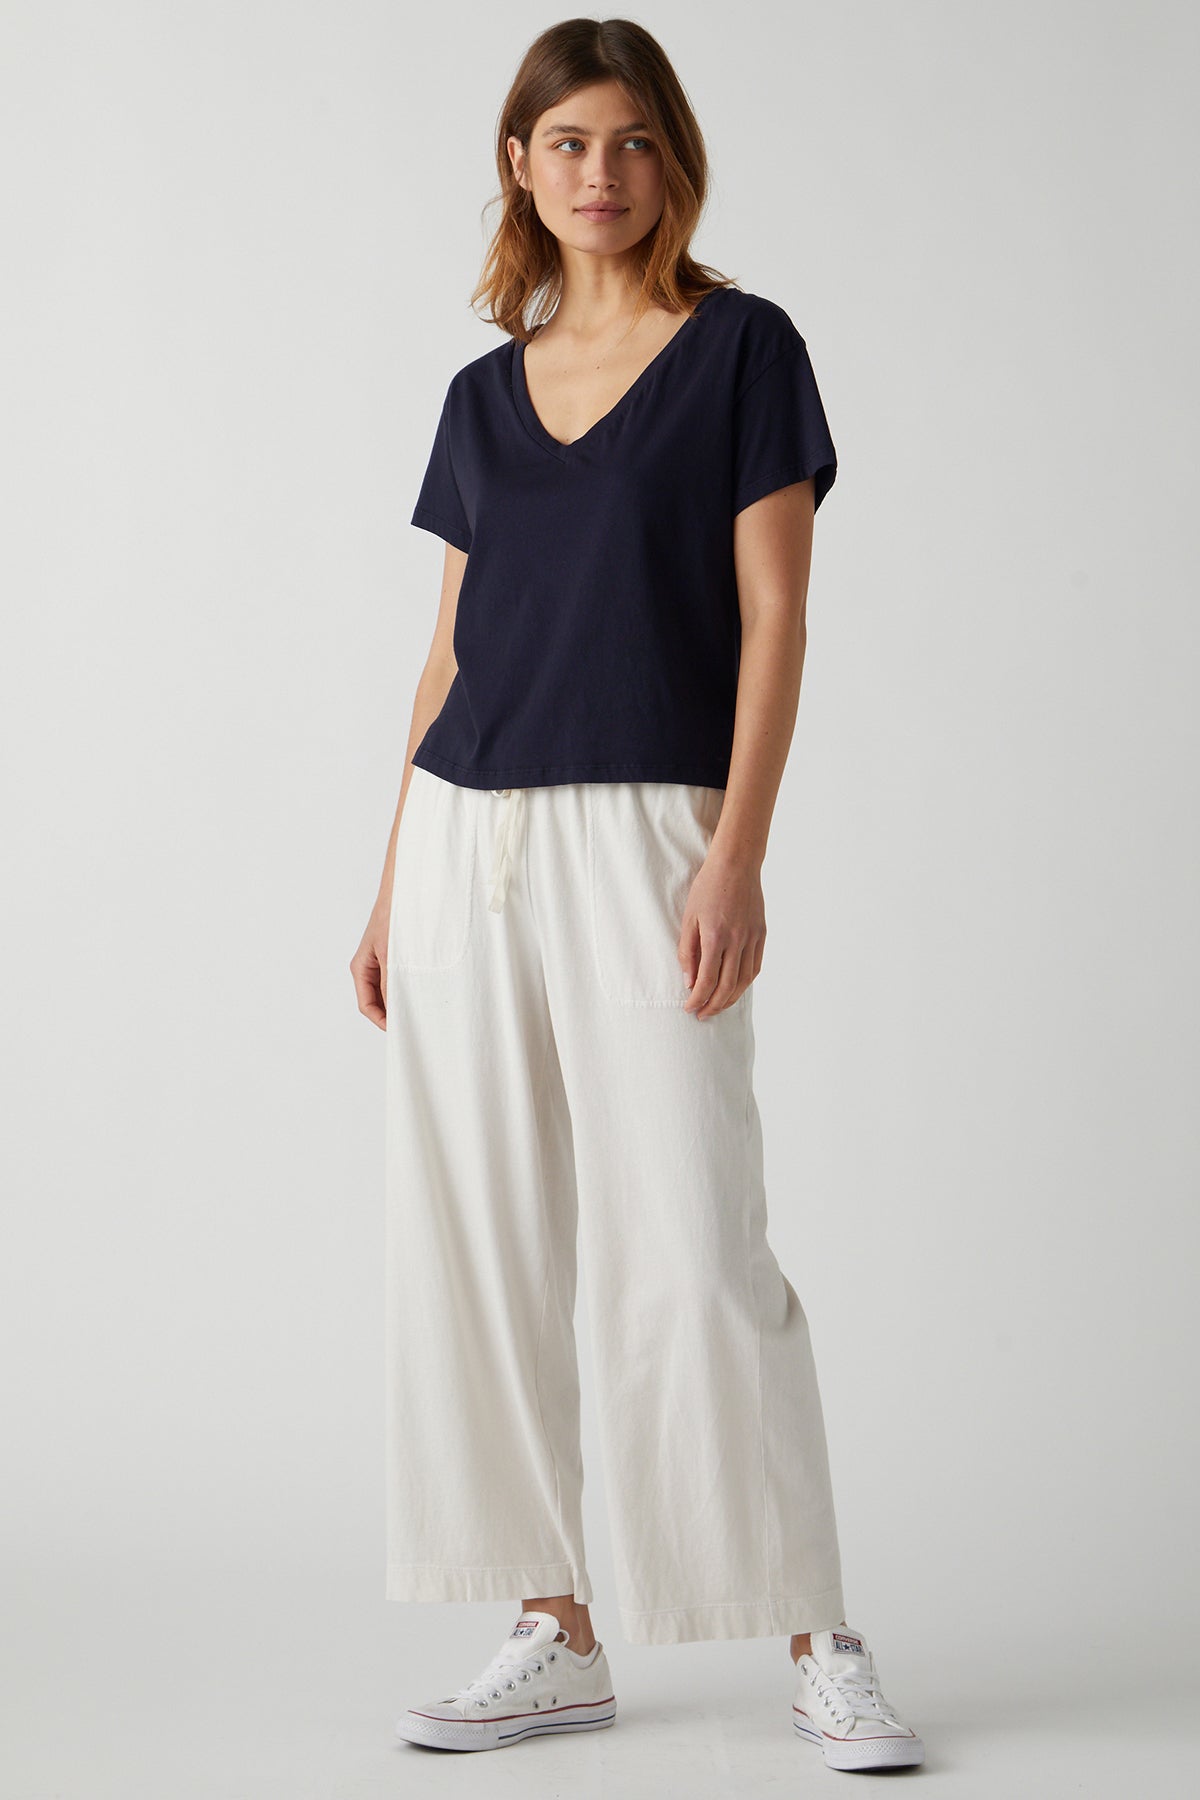 the model is wearing a Velvet by Jenny Graham VENICE TEE and wide leg pants.-25484413894849